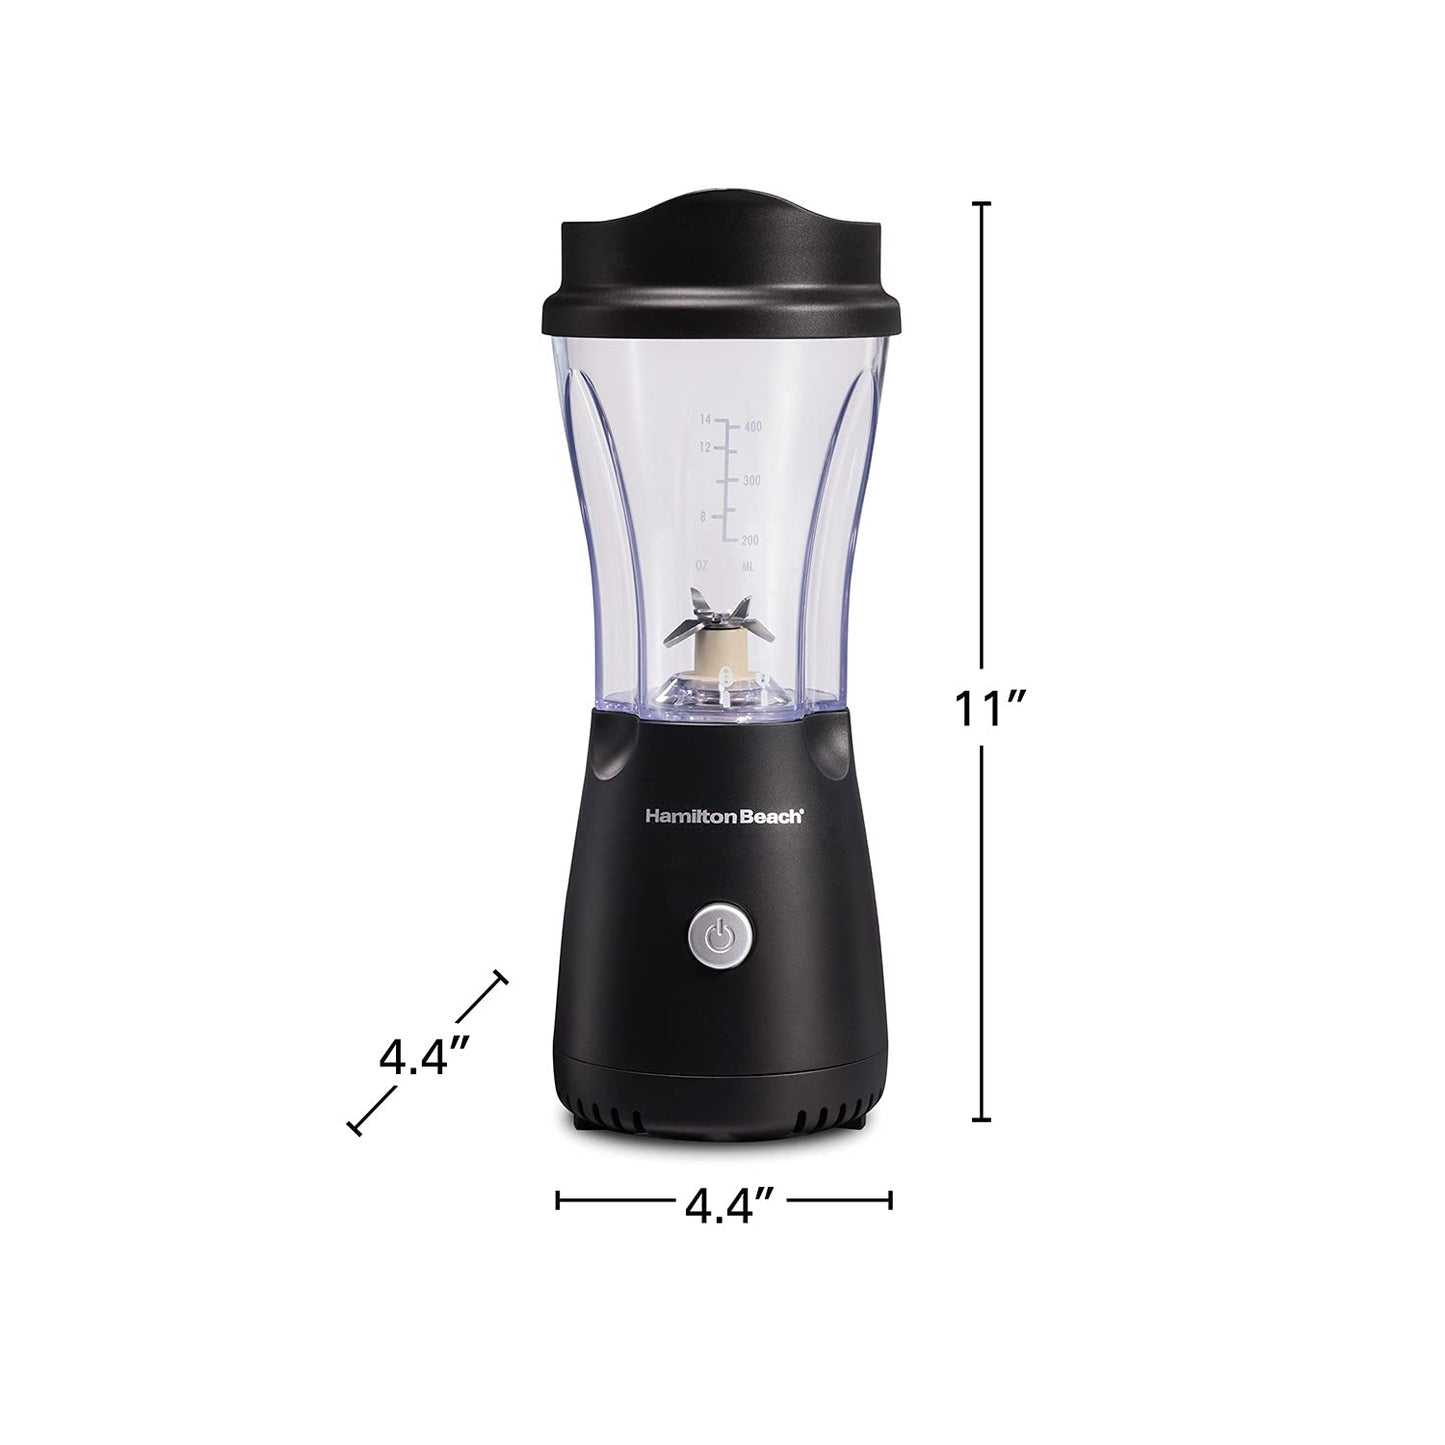 Hamilton Beach Personal Creations Blender with Travel Lid - Ice Crushing Black New